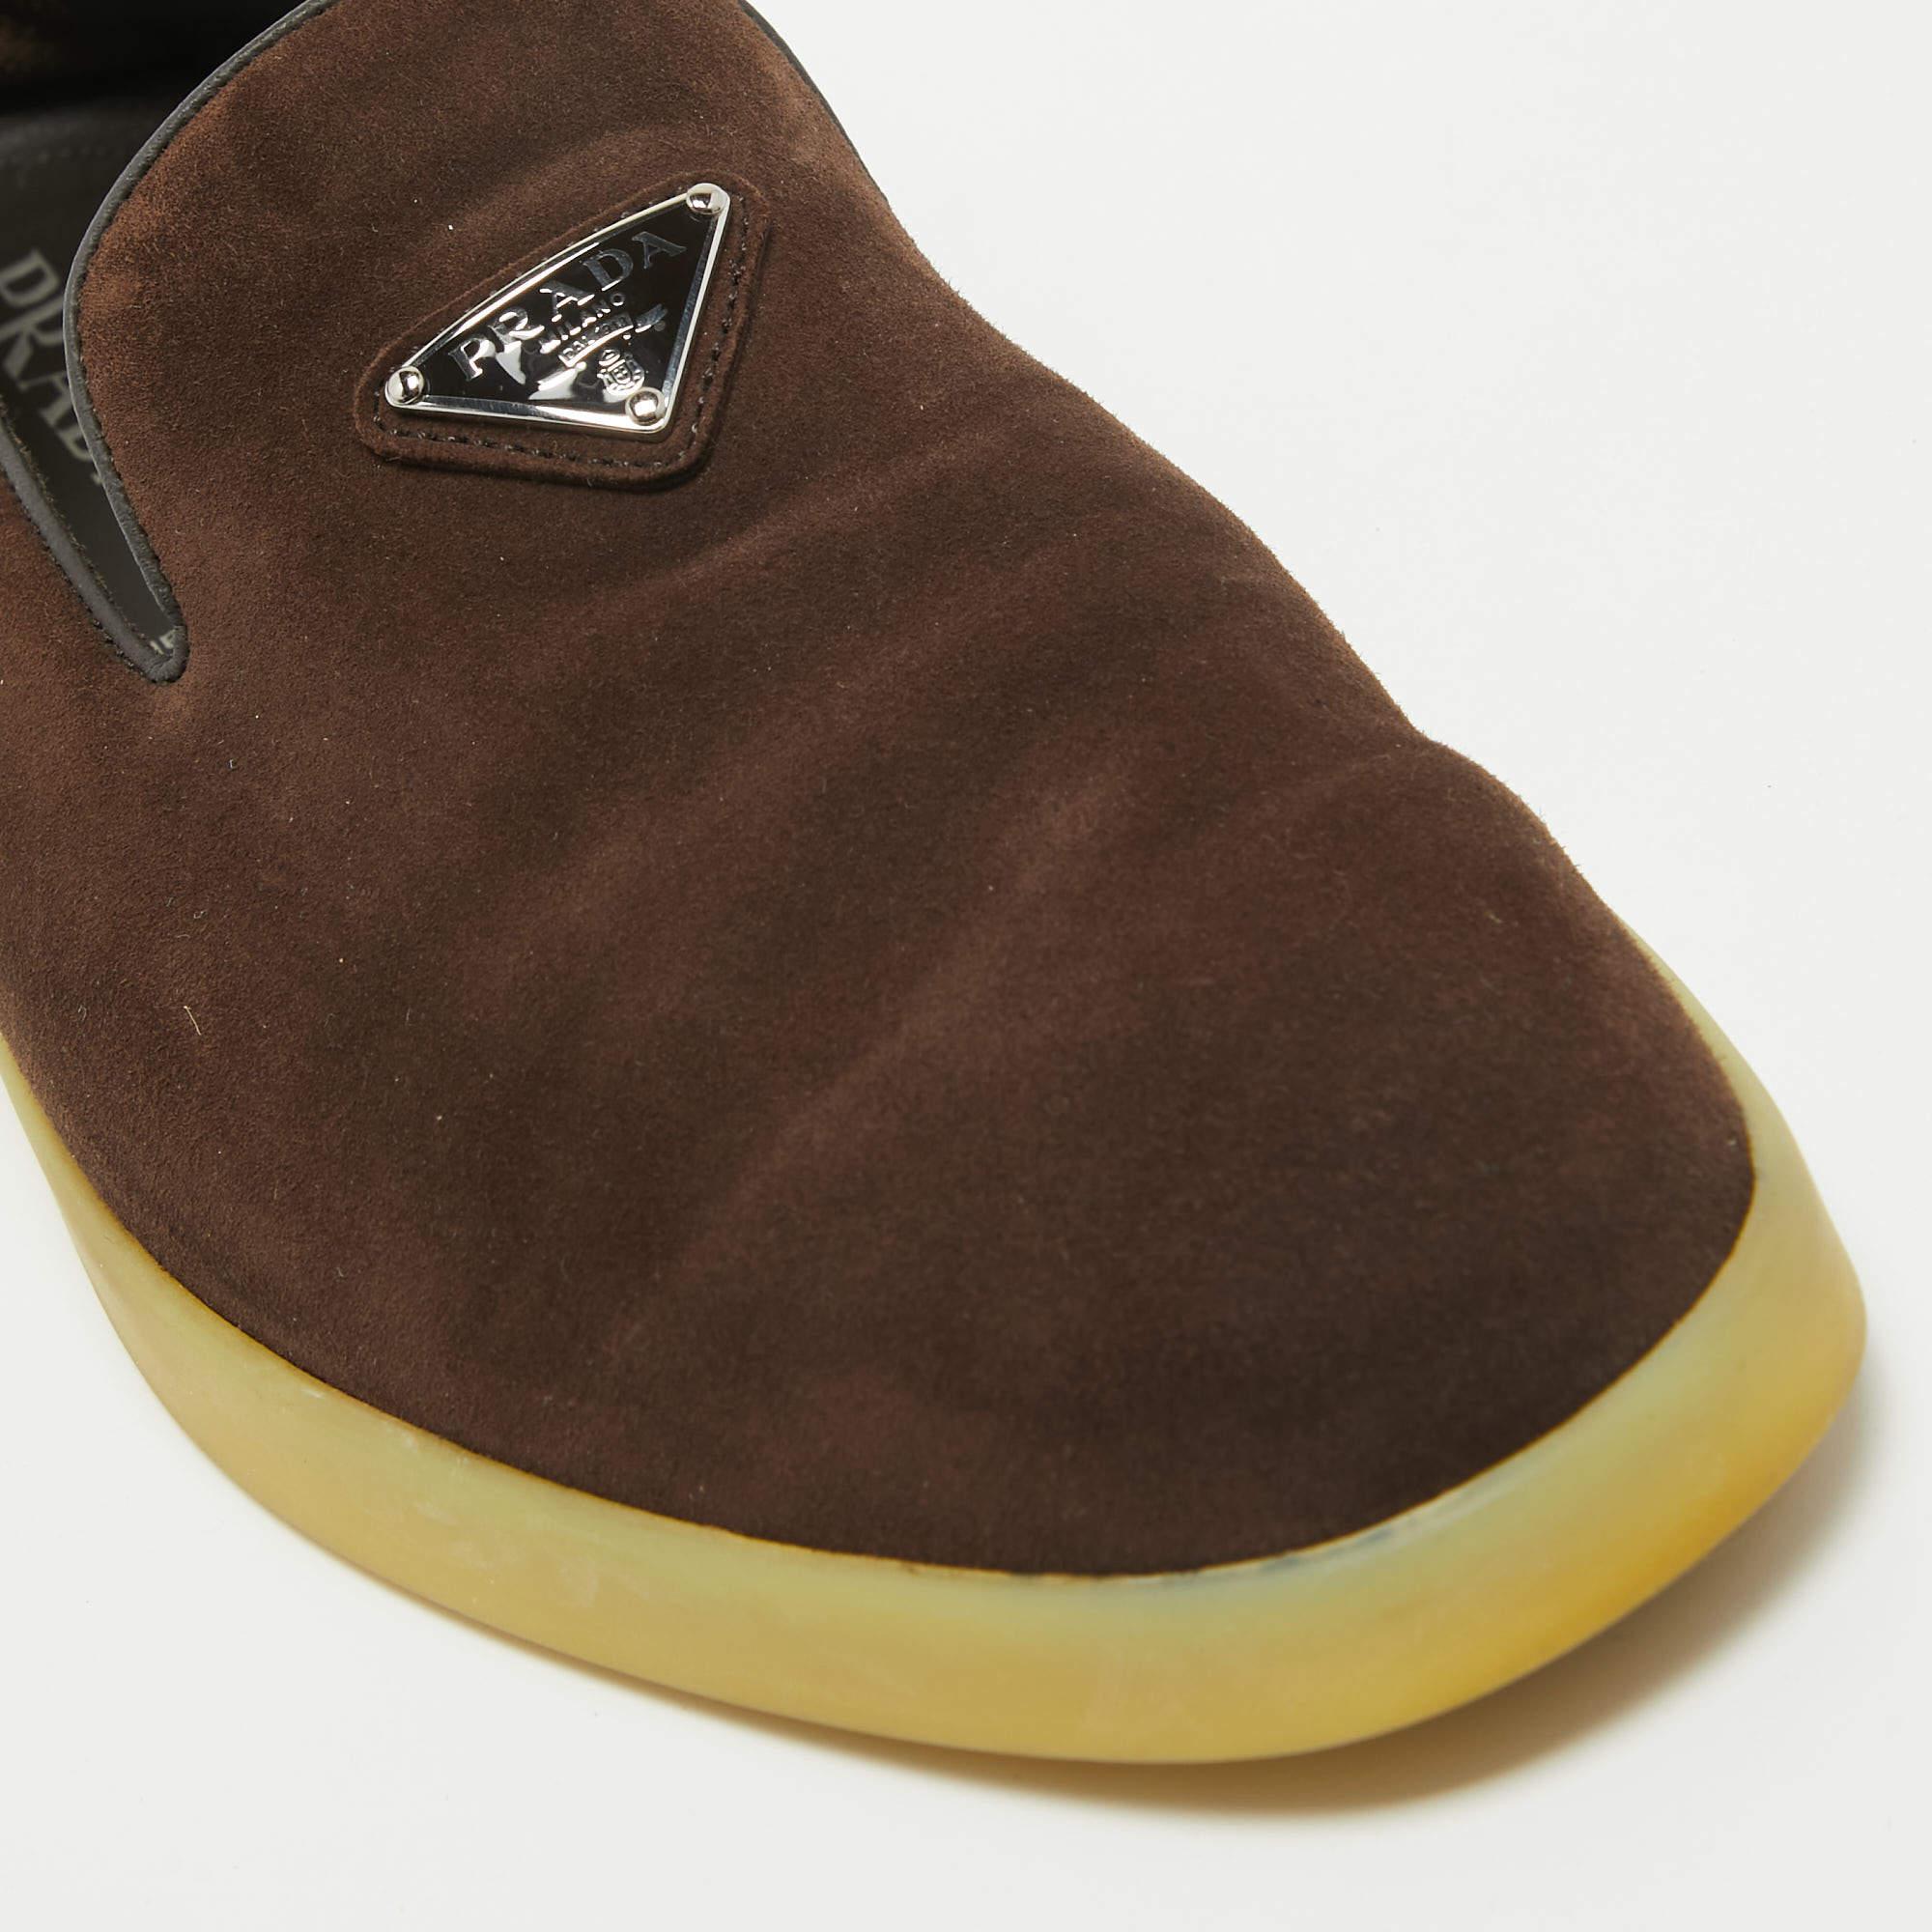 Prada Brown Suede Slip On Loafers Size 42 For Sale 1